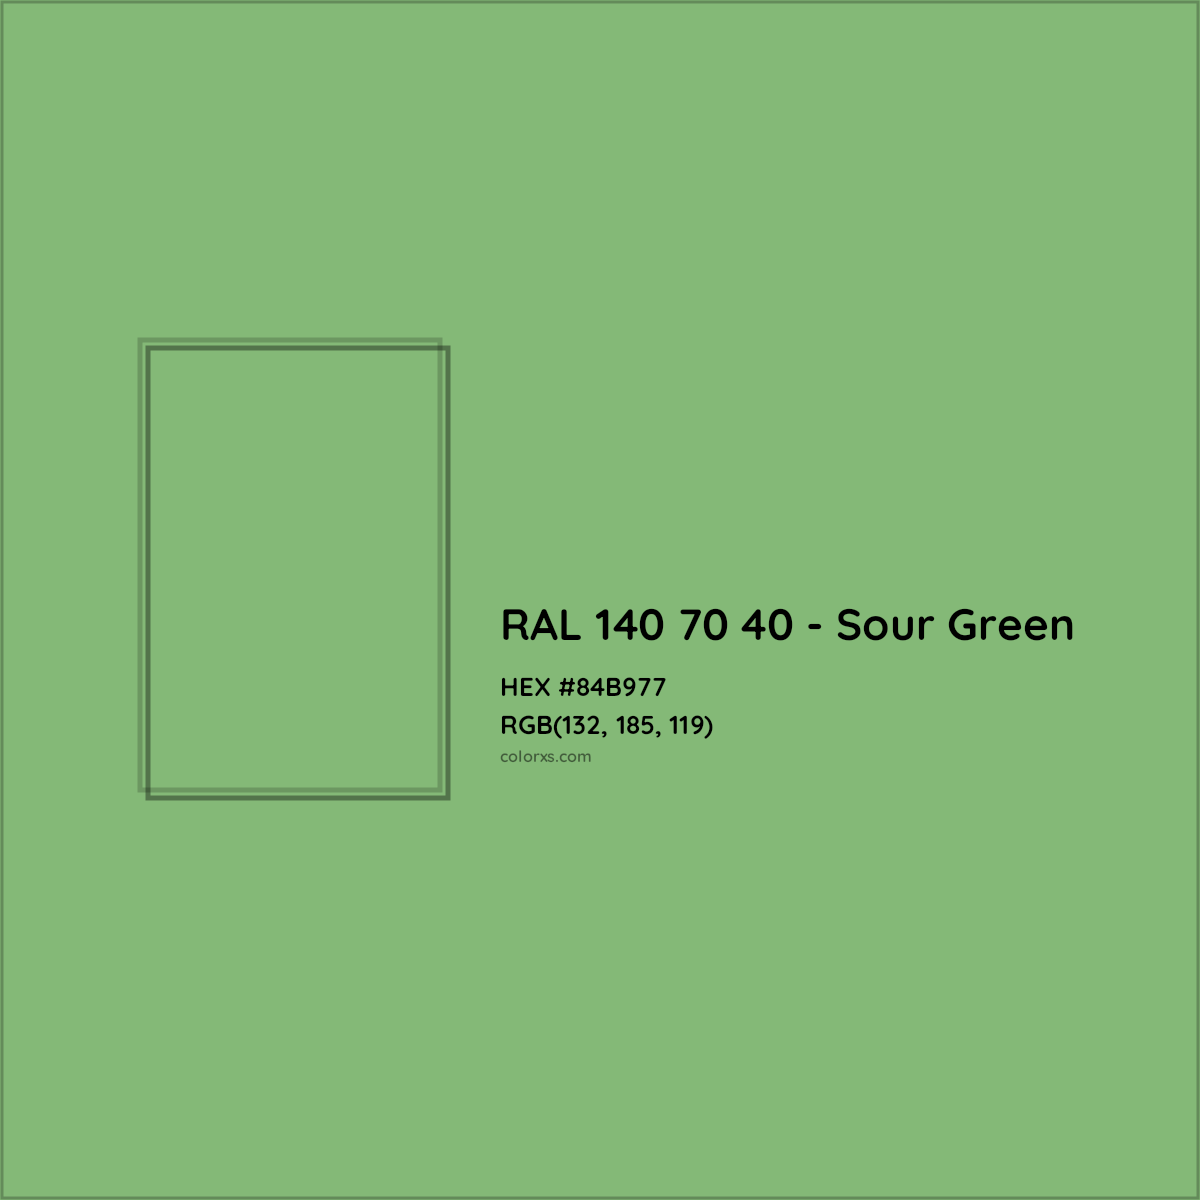 HEX #84B977 RAL 140 70 40 - Sour Green CMS RAL Design - Color Code